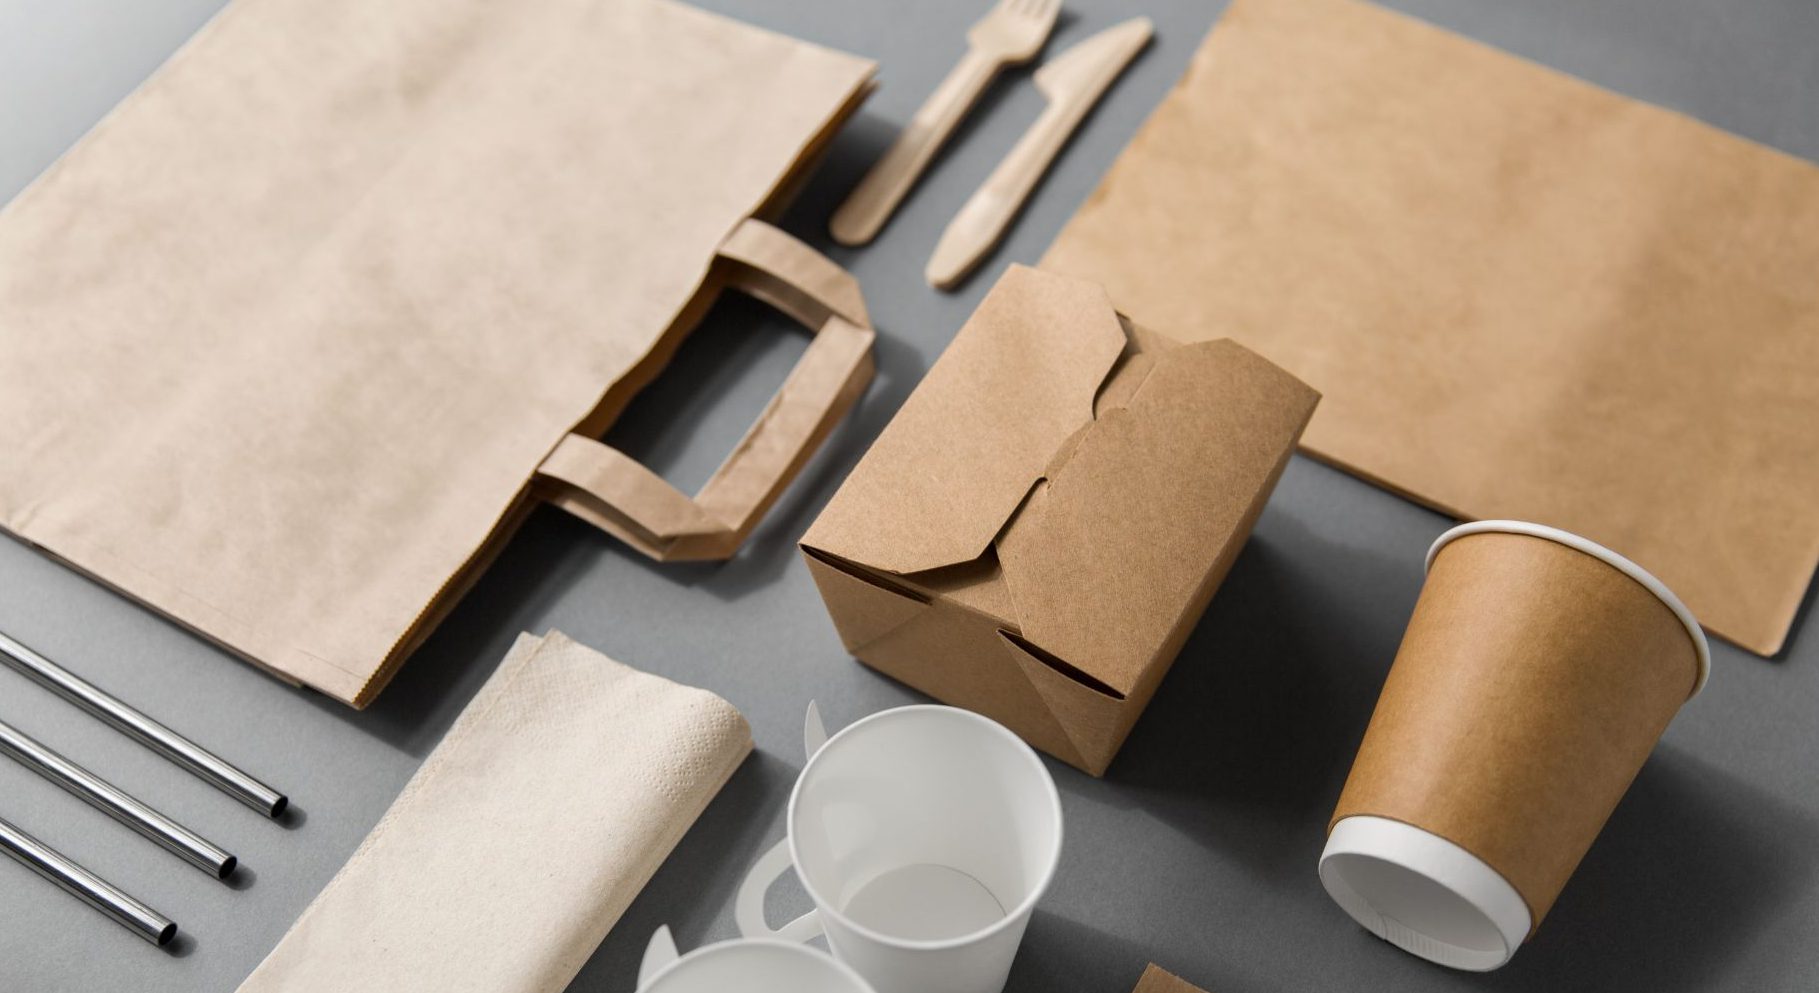 Global Sustainable Plastic Packaging Market Outlook, Opportunities And Strategies – Includes Sustainable Plastic Packaging Market Size